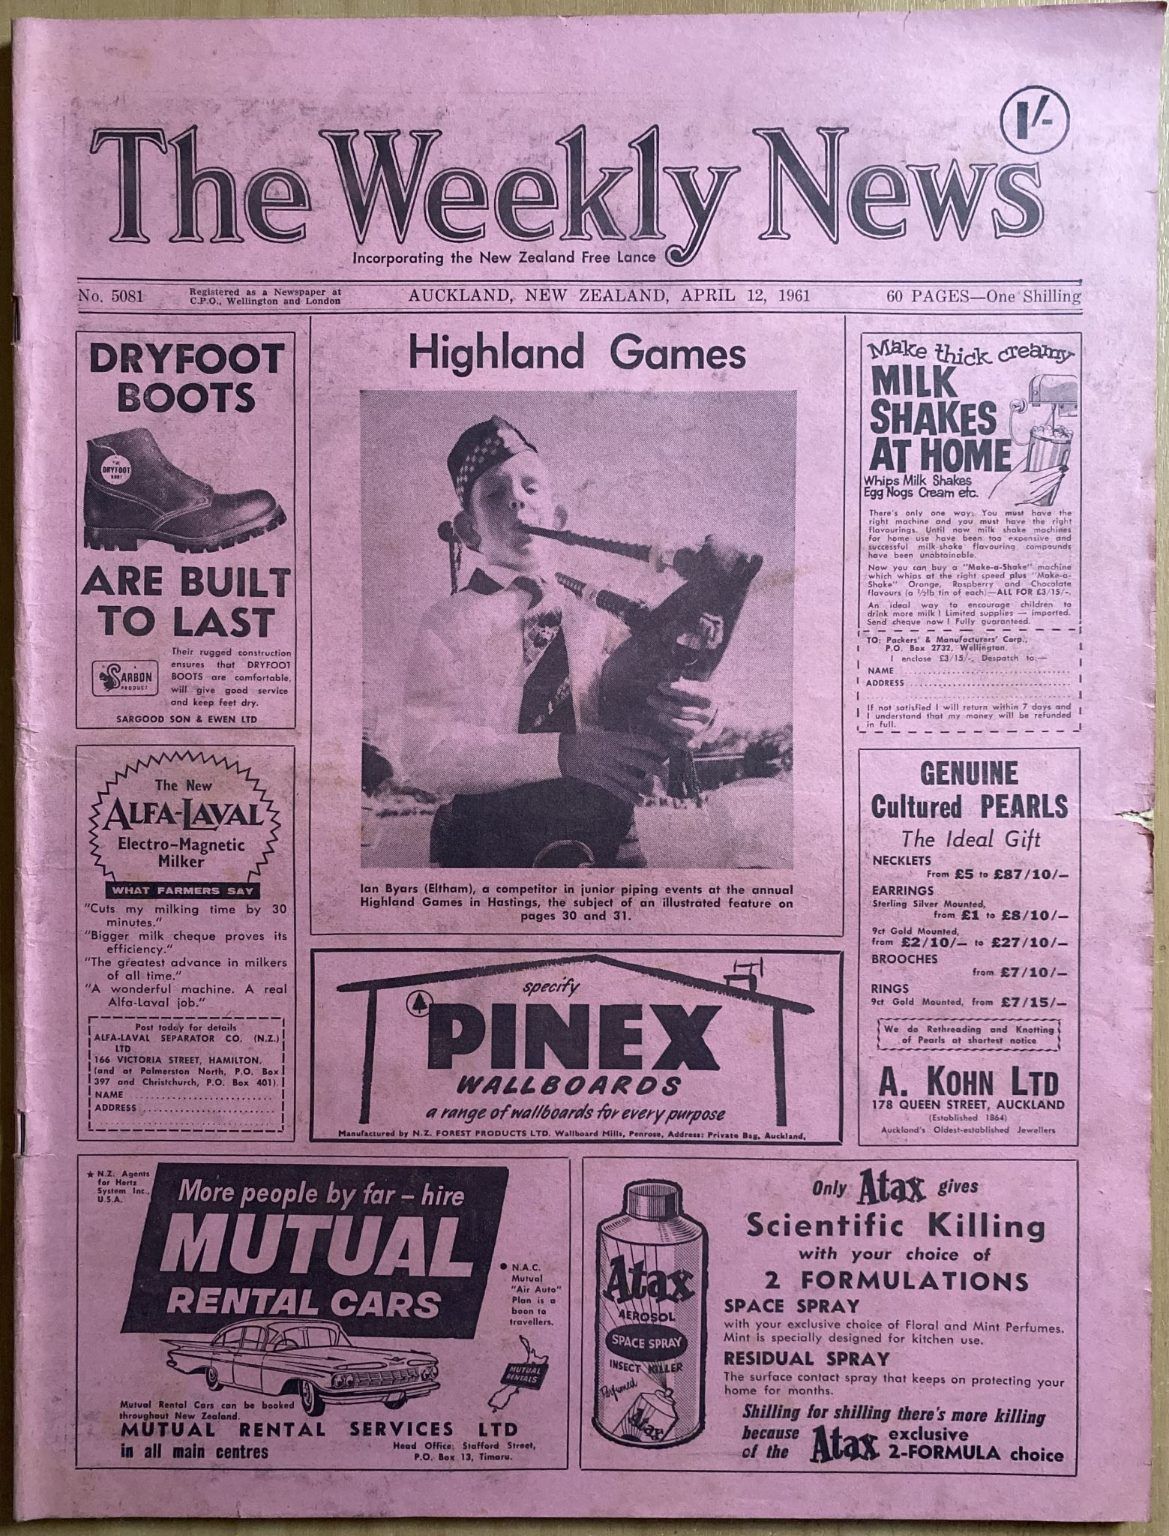 OLD NEWSPAPER: The Weekly News, No. 5081, 12 April 1961